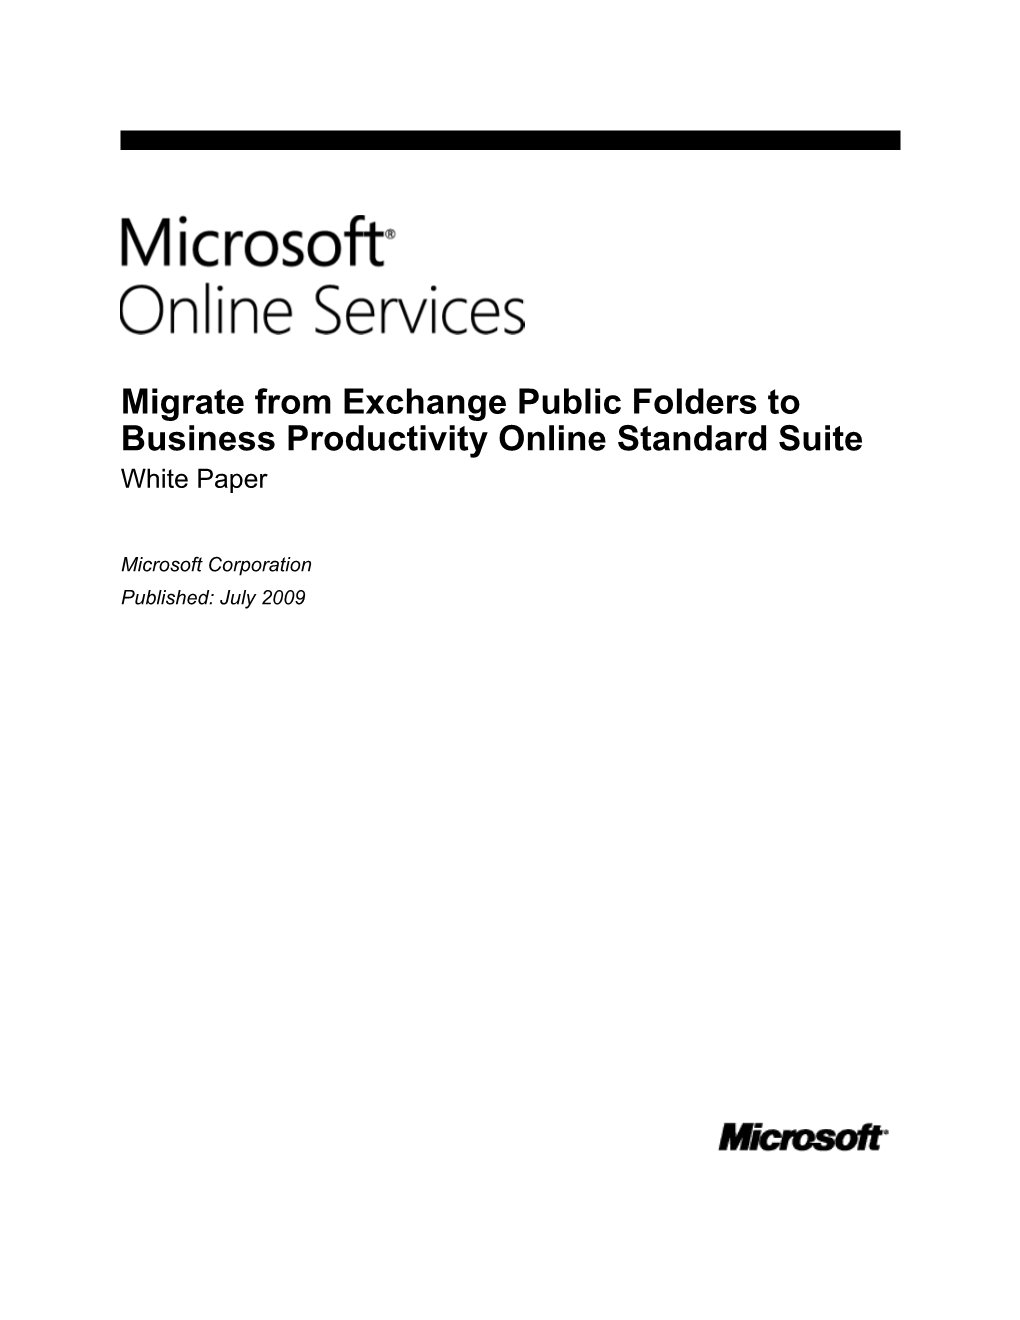 Migrate from Exchange Public Folders to Business Productivity Online Standard Suite